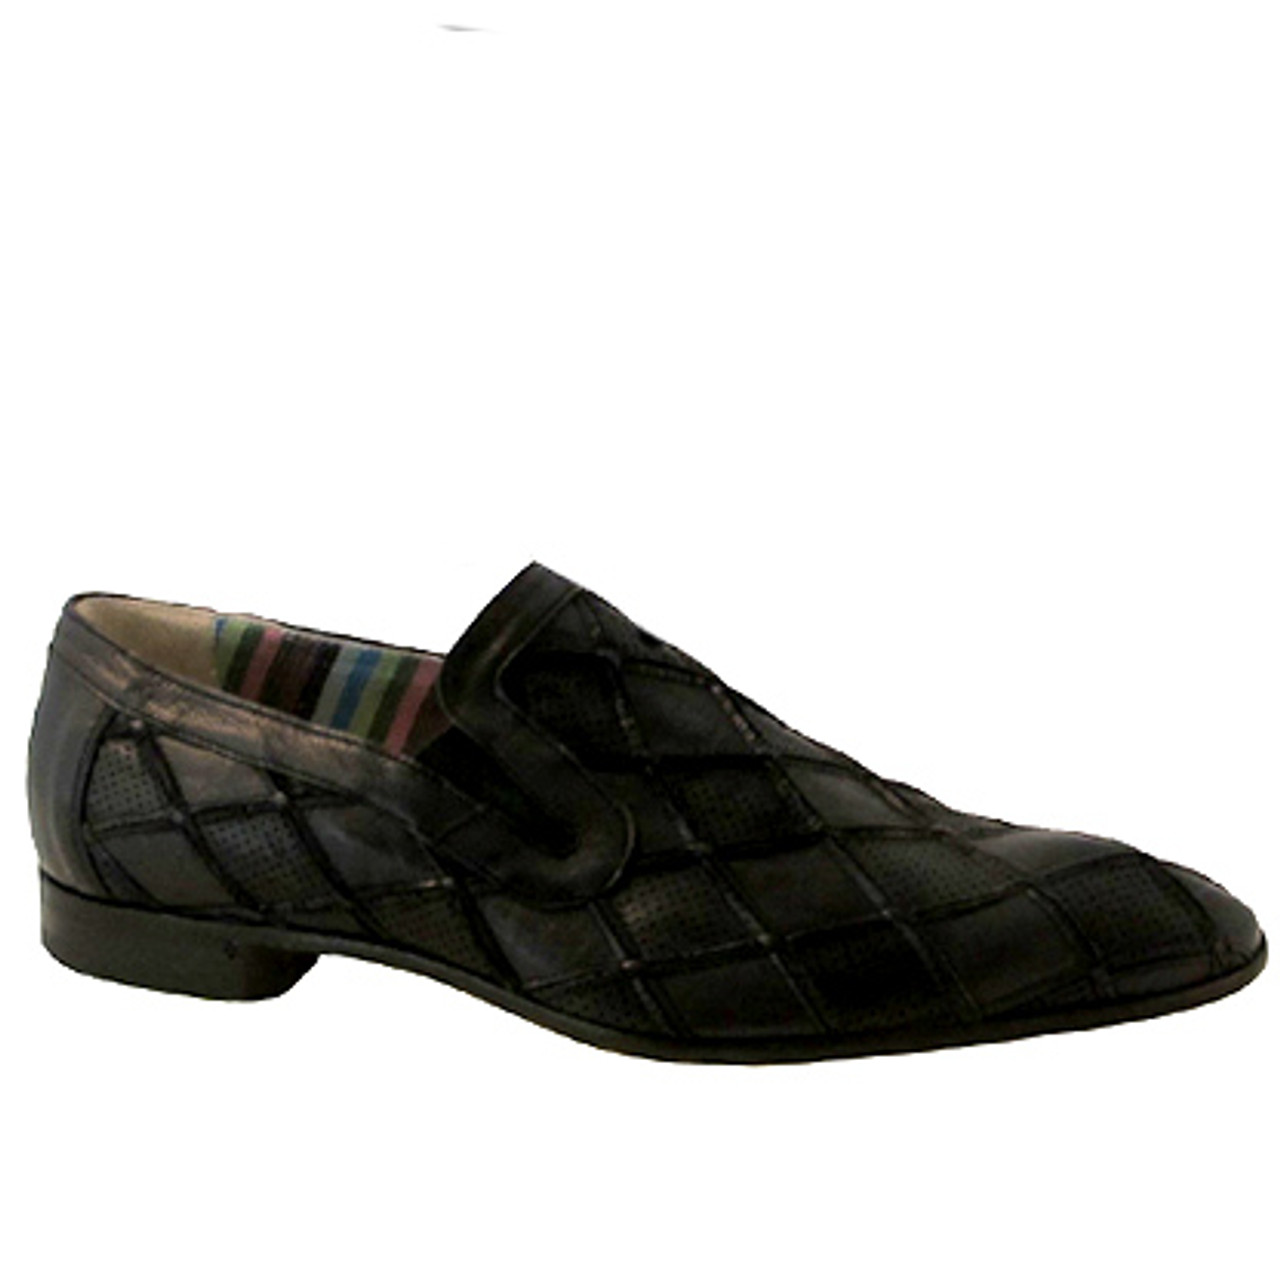 Men's Italian Leather Slip On Carlos Ventura Dressy Shoes1676 Available  Black And White